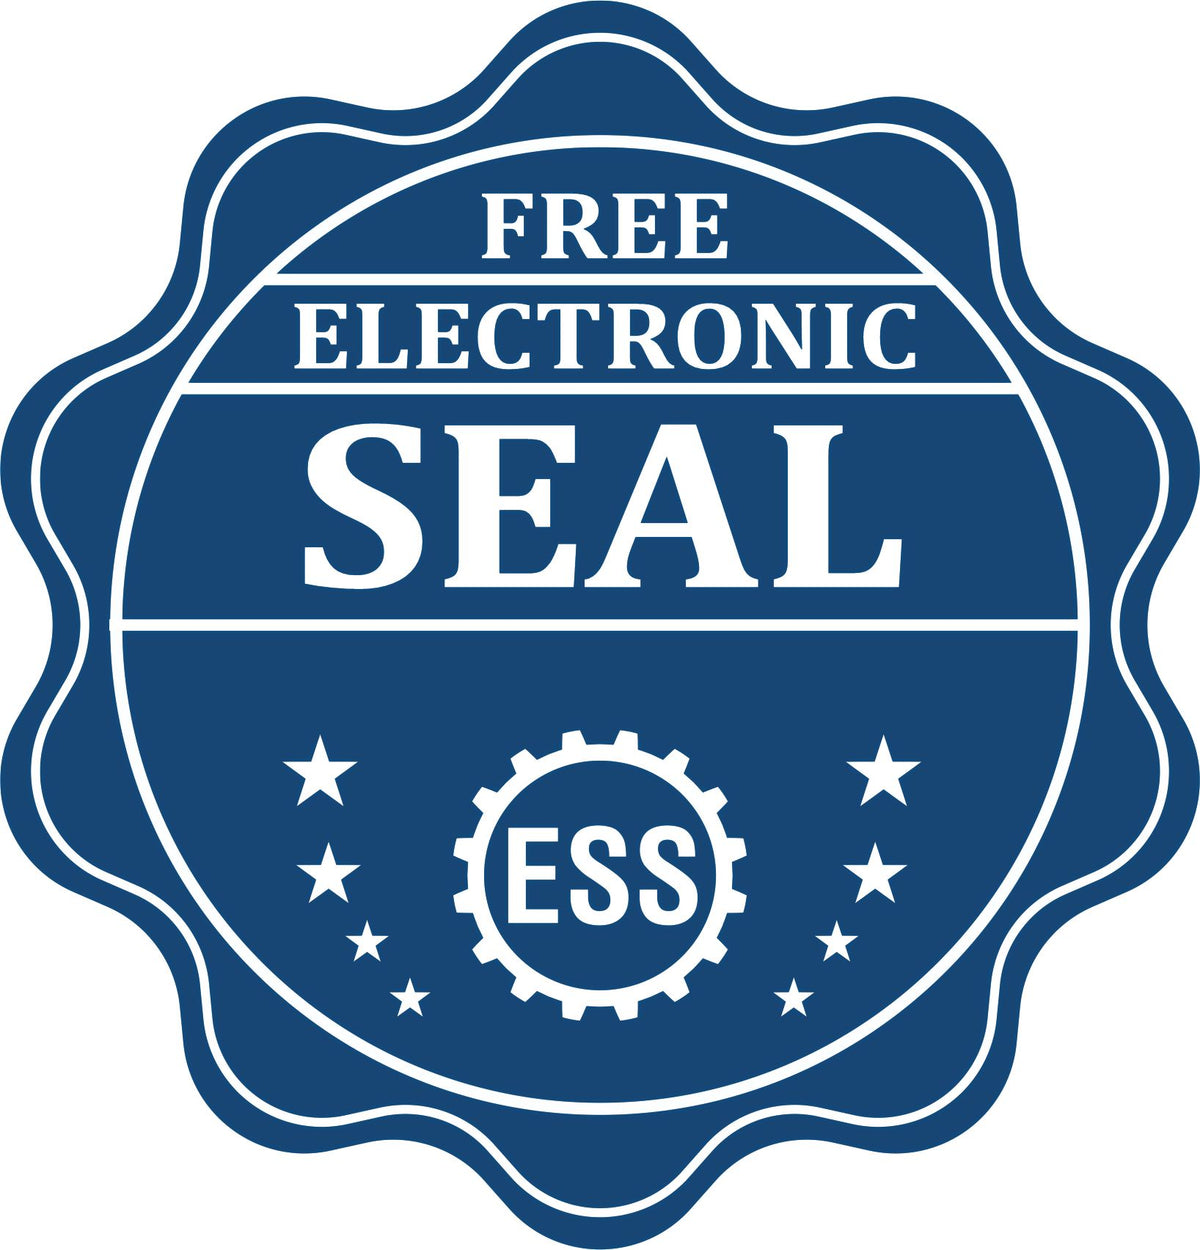 A badge showing a free electronic seal for the Hybrid Utah Engineer Seal with stars and the ESS gear on the emblem.